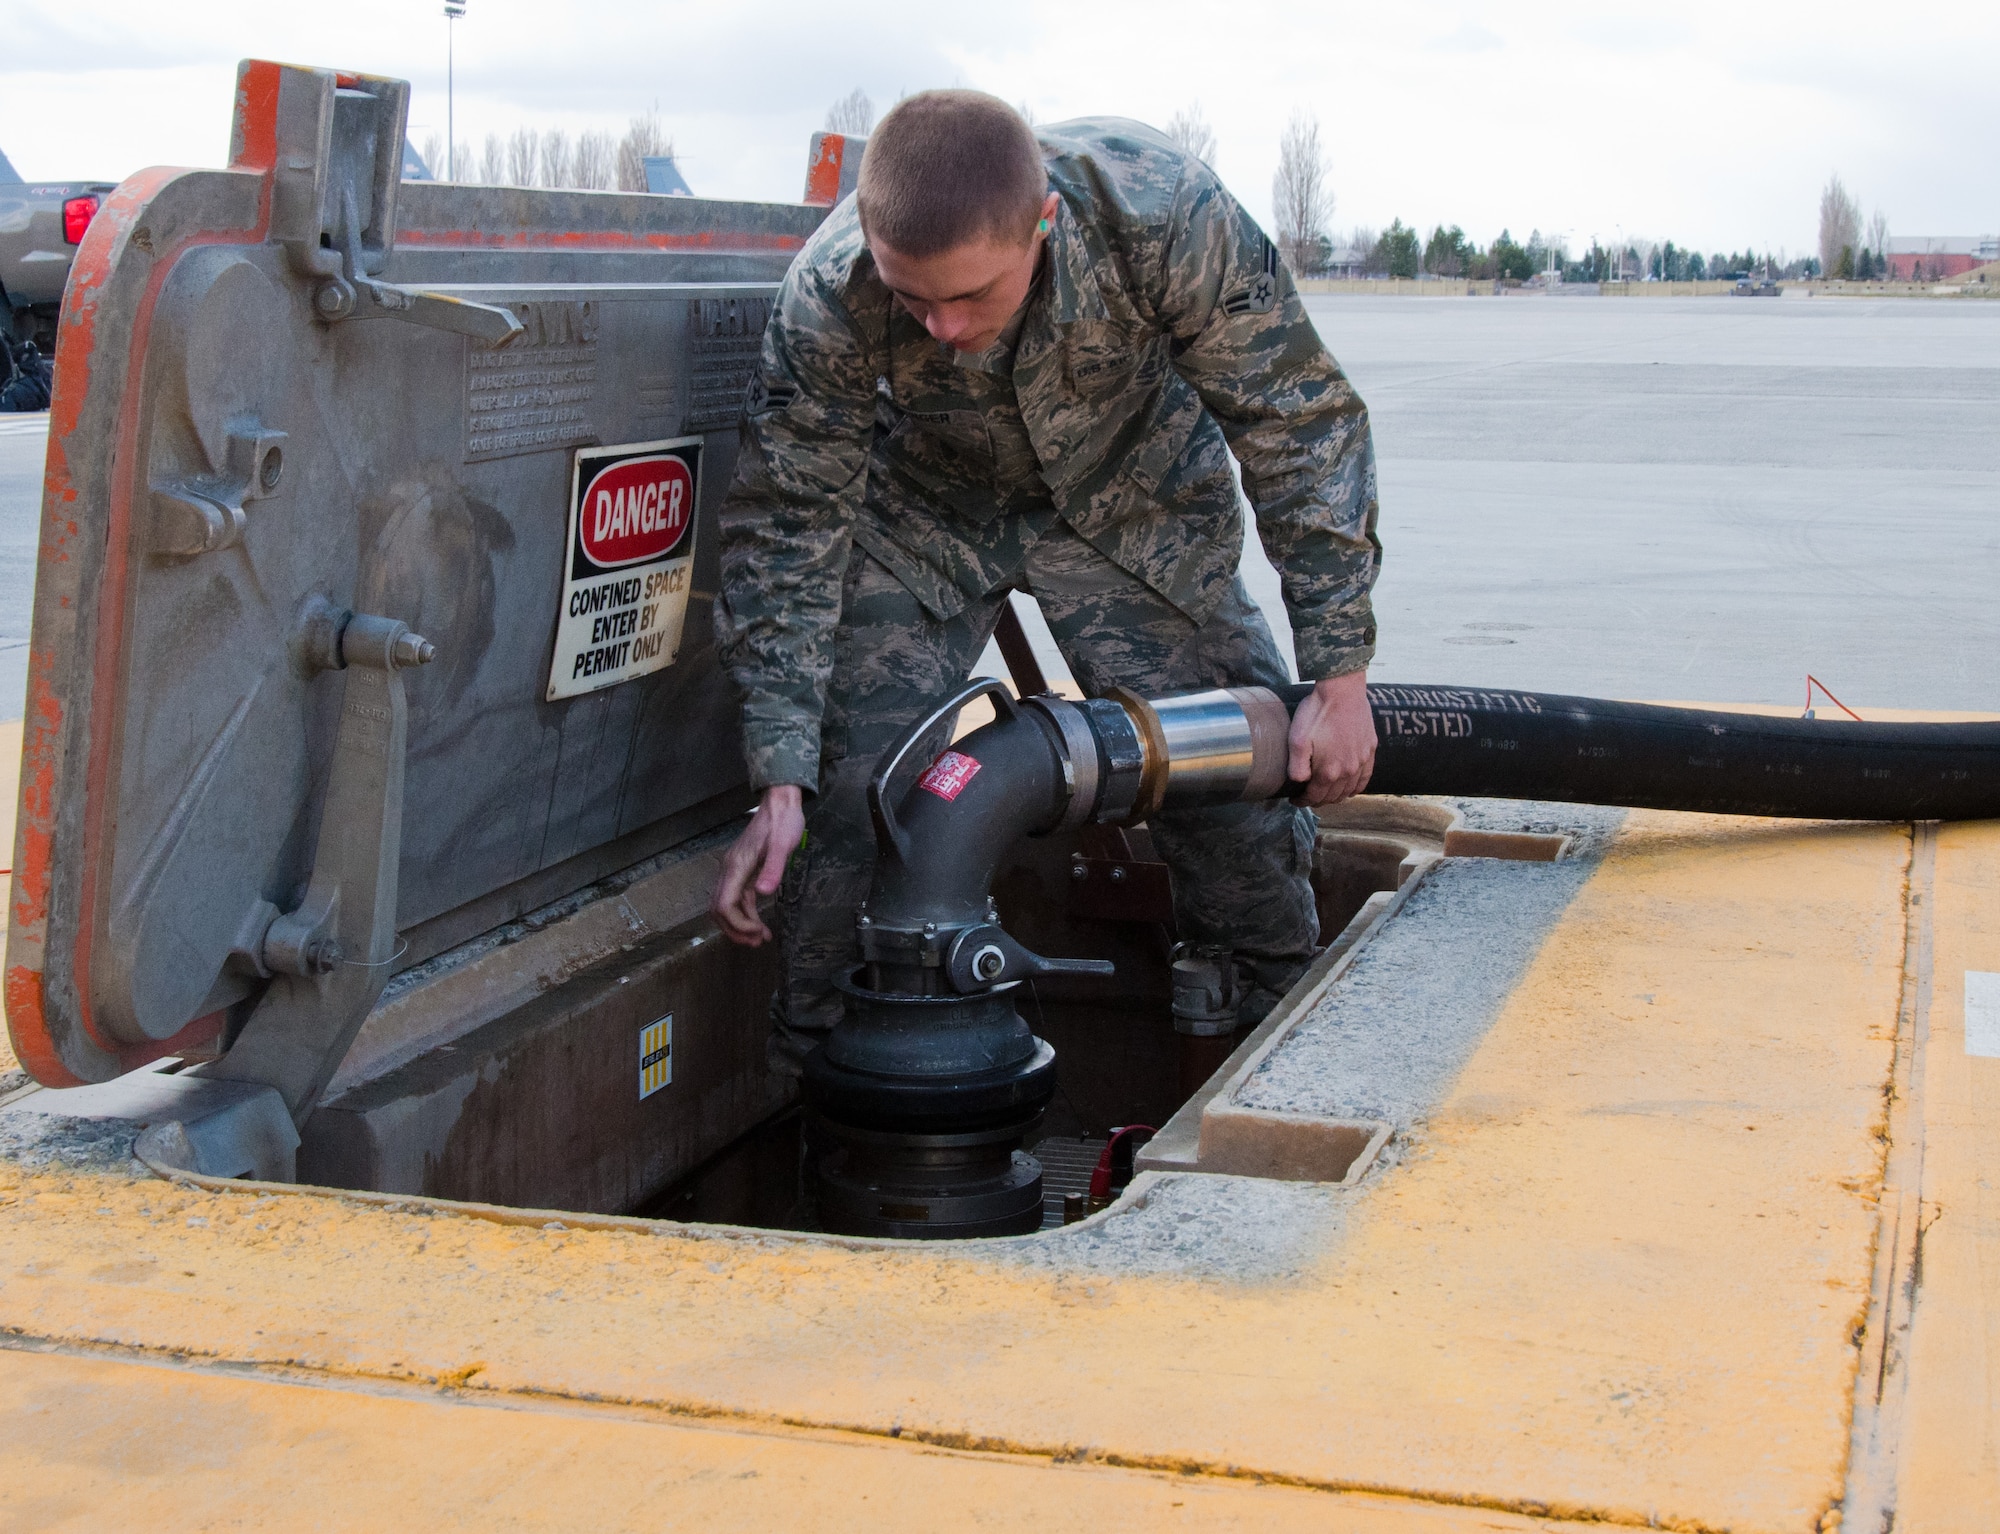 Airman 1st Class Daniel Langer, a 92nd Logistics Readiness Squadron fuels distribution operator, hooks up a “moose head” hydrant coupler from an R-12 fuel truck to the ground fuel hydrant system prior to an aircraft refueling operation March 2, 2015, at Fairchild Air Force Base, Wash. Fuels distribution operators use the R-12 fuel truck to connect aircraft to the ground-based fuel hydrant outlets. (U.S. Air Force photo/Capt. David Liapis)